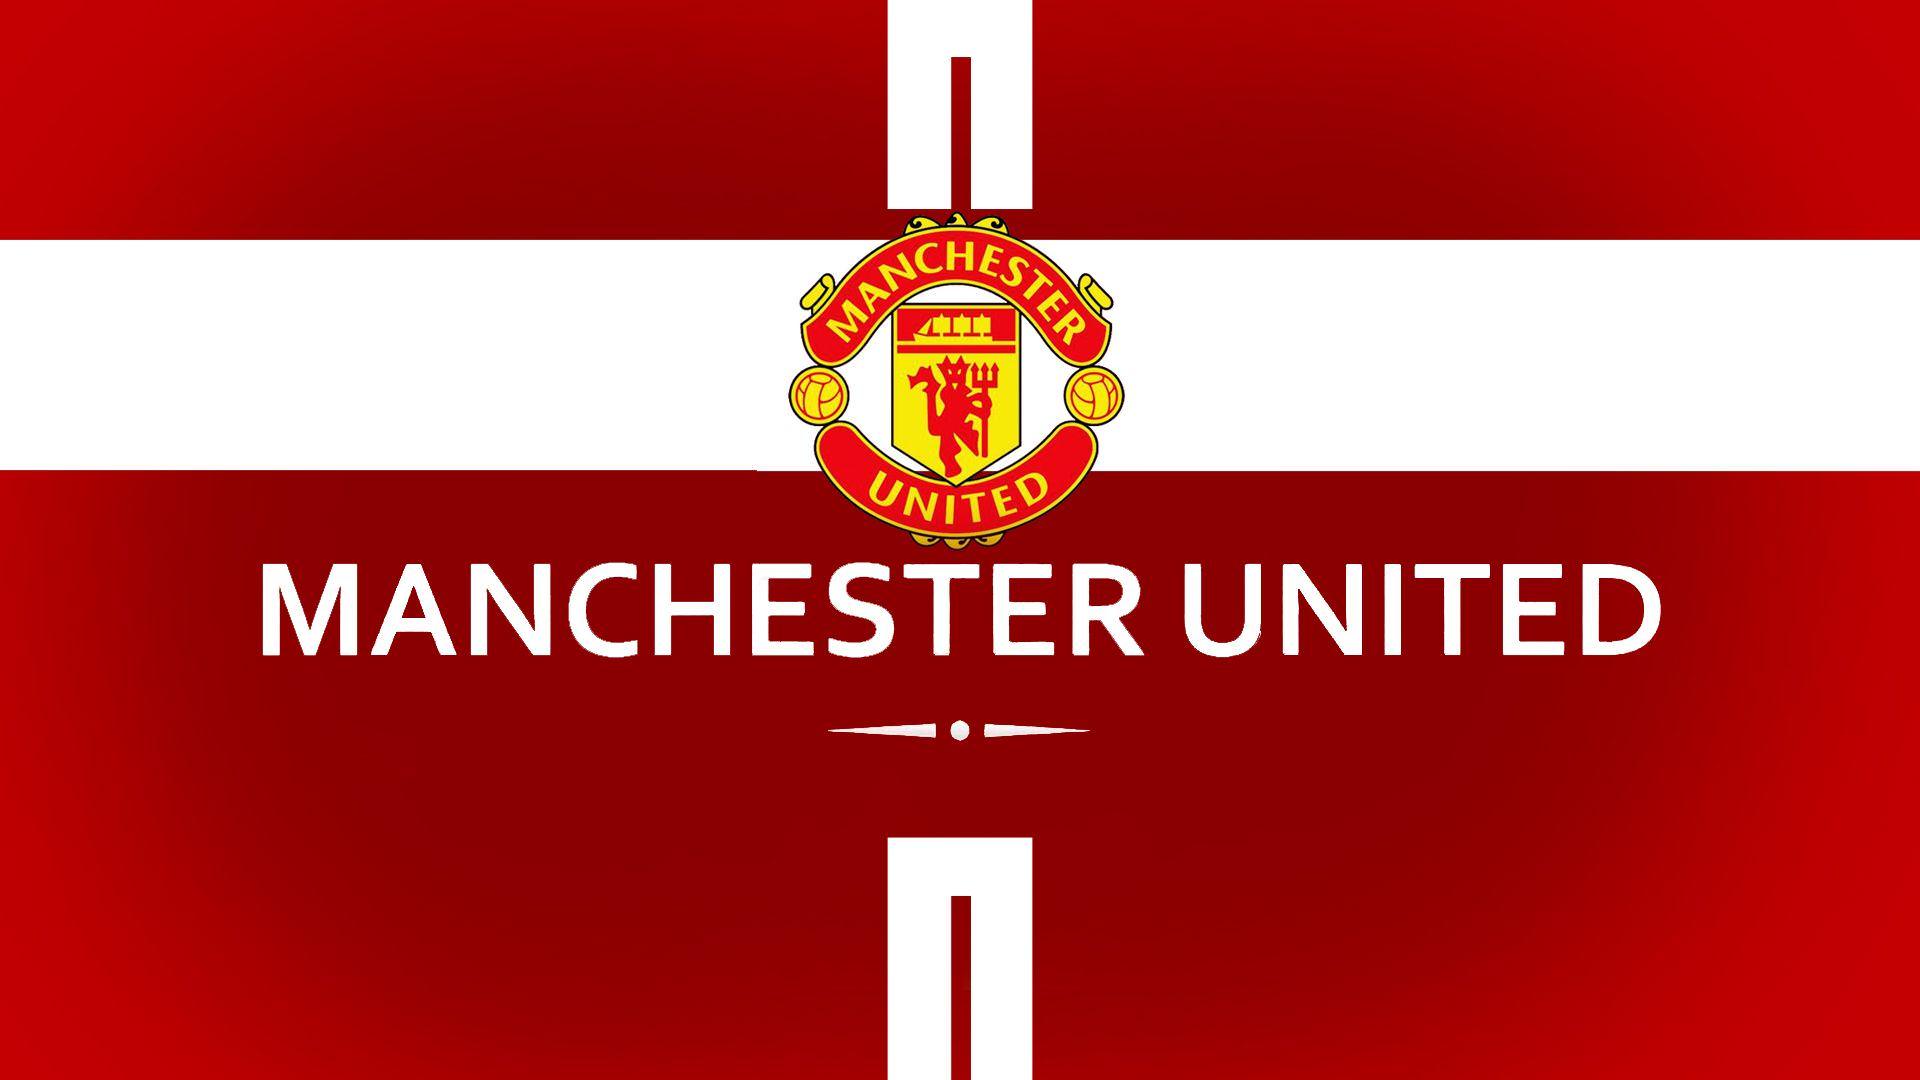 Download Manchester United 4K 8K 2560x1440 Free Ultra HD Pictures  Backgrounds Images Wallpaper 